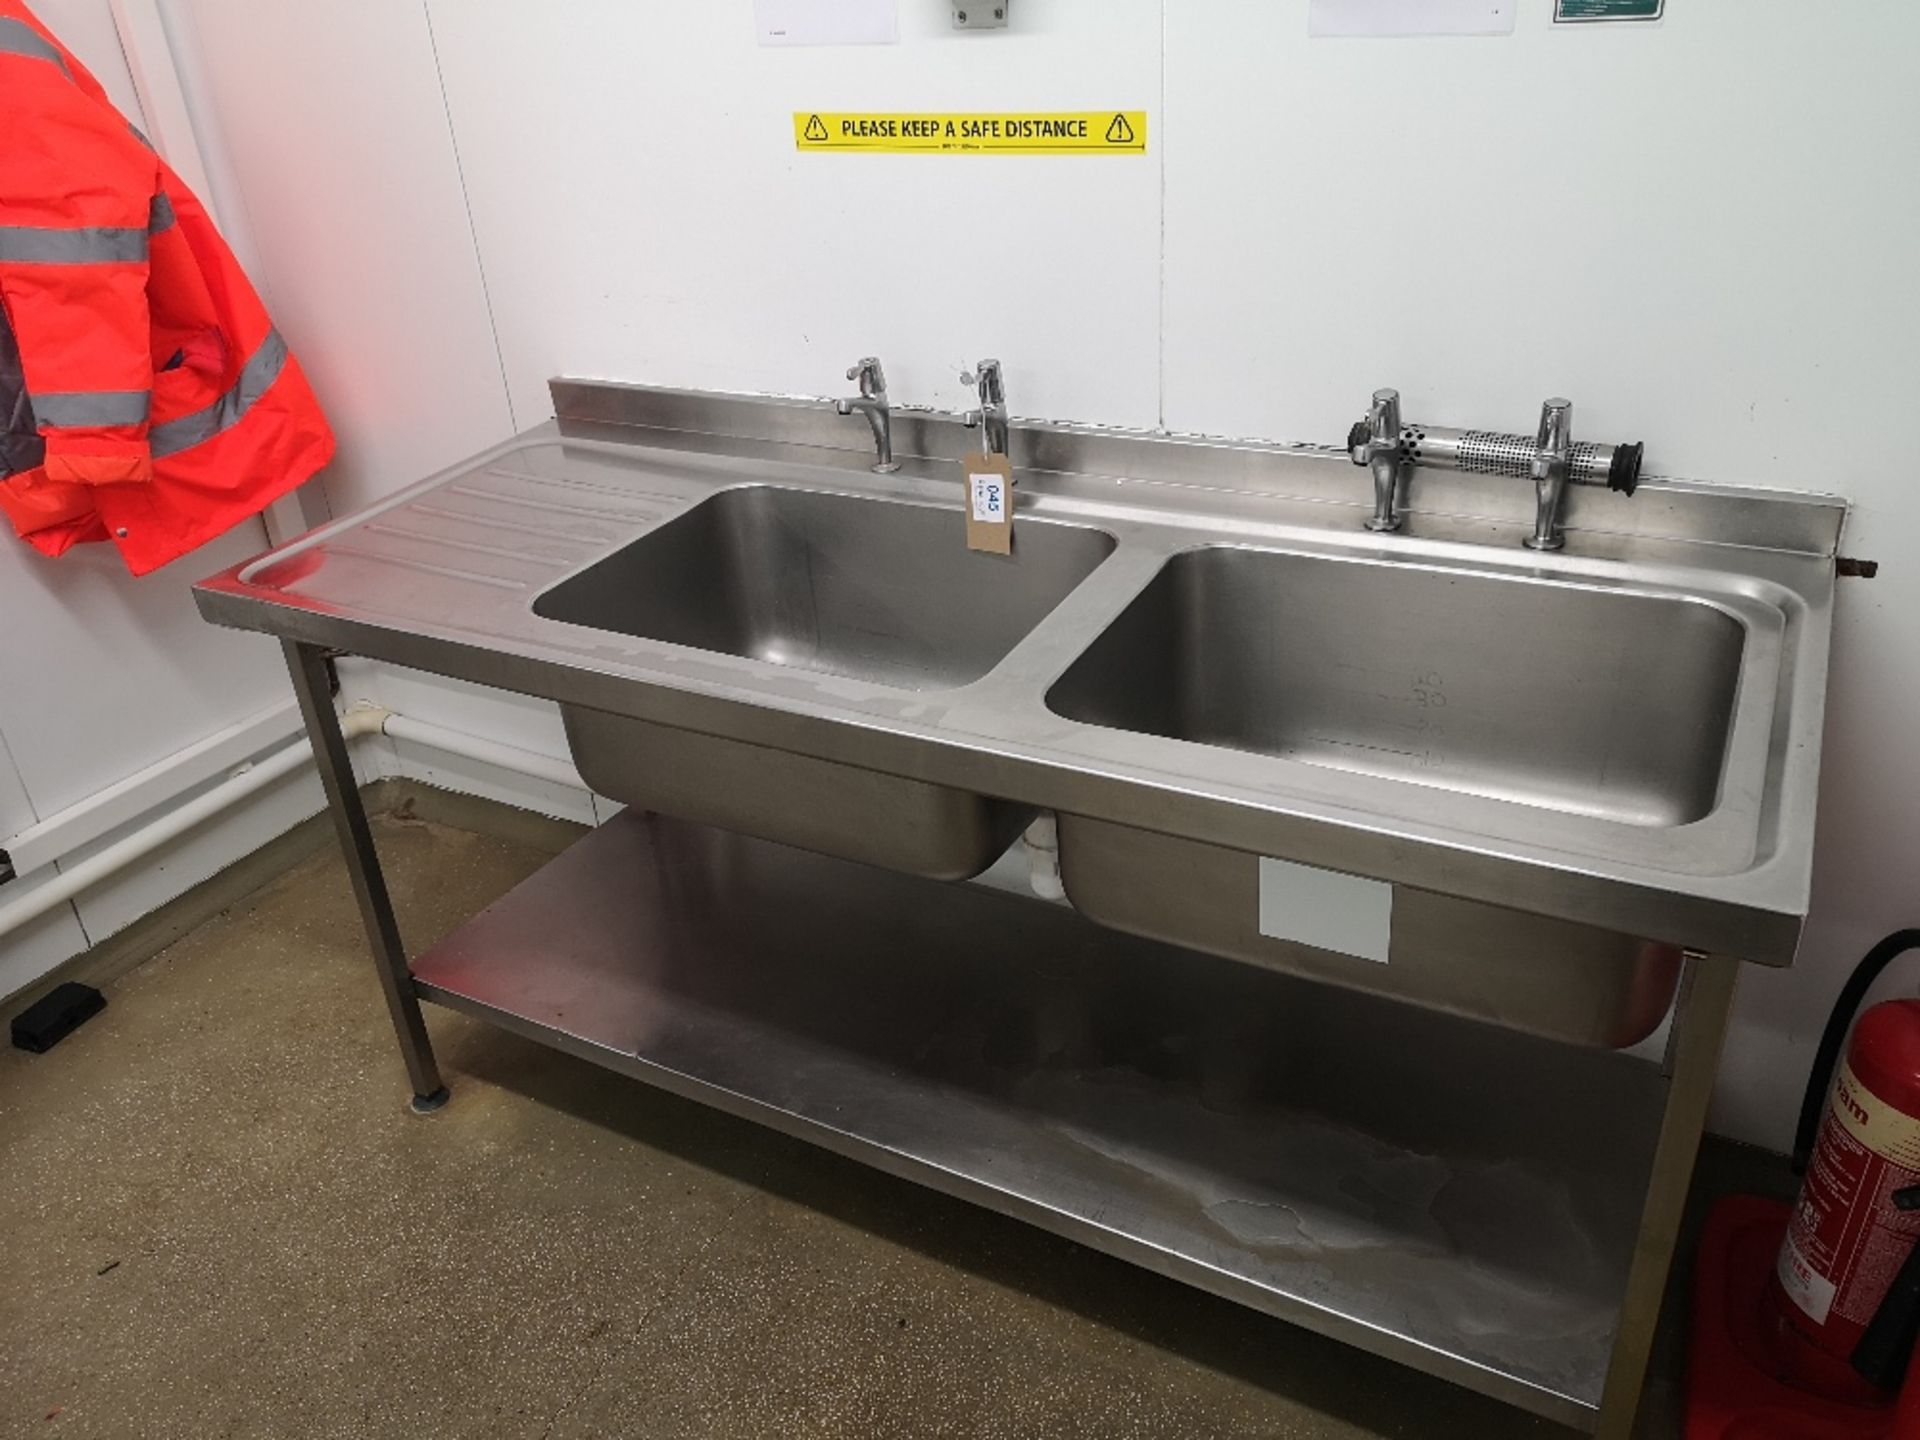 Stainless Steel Double Sink Basin Unit - Image 2 of 3